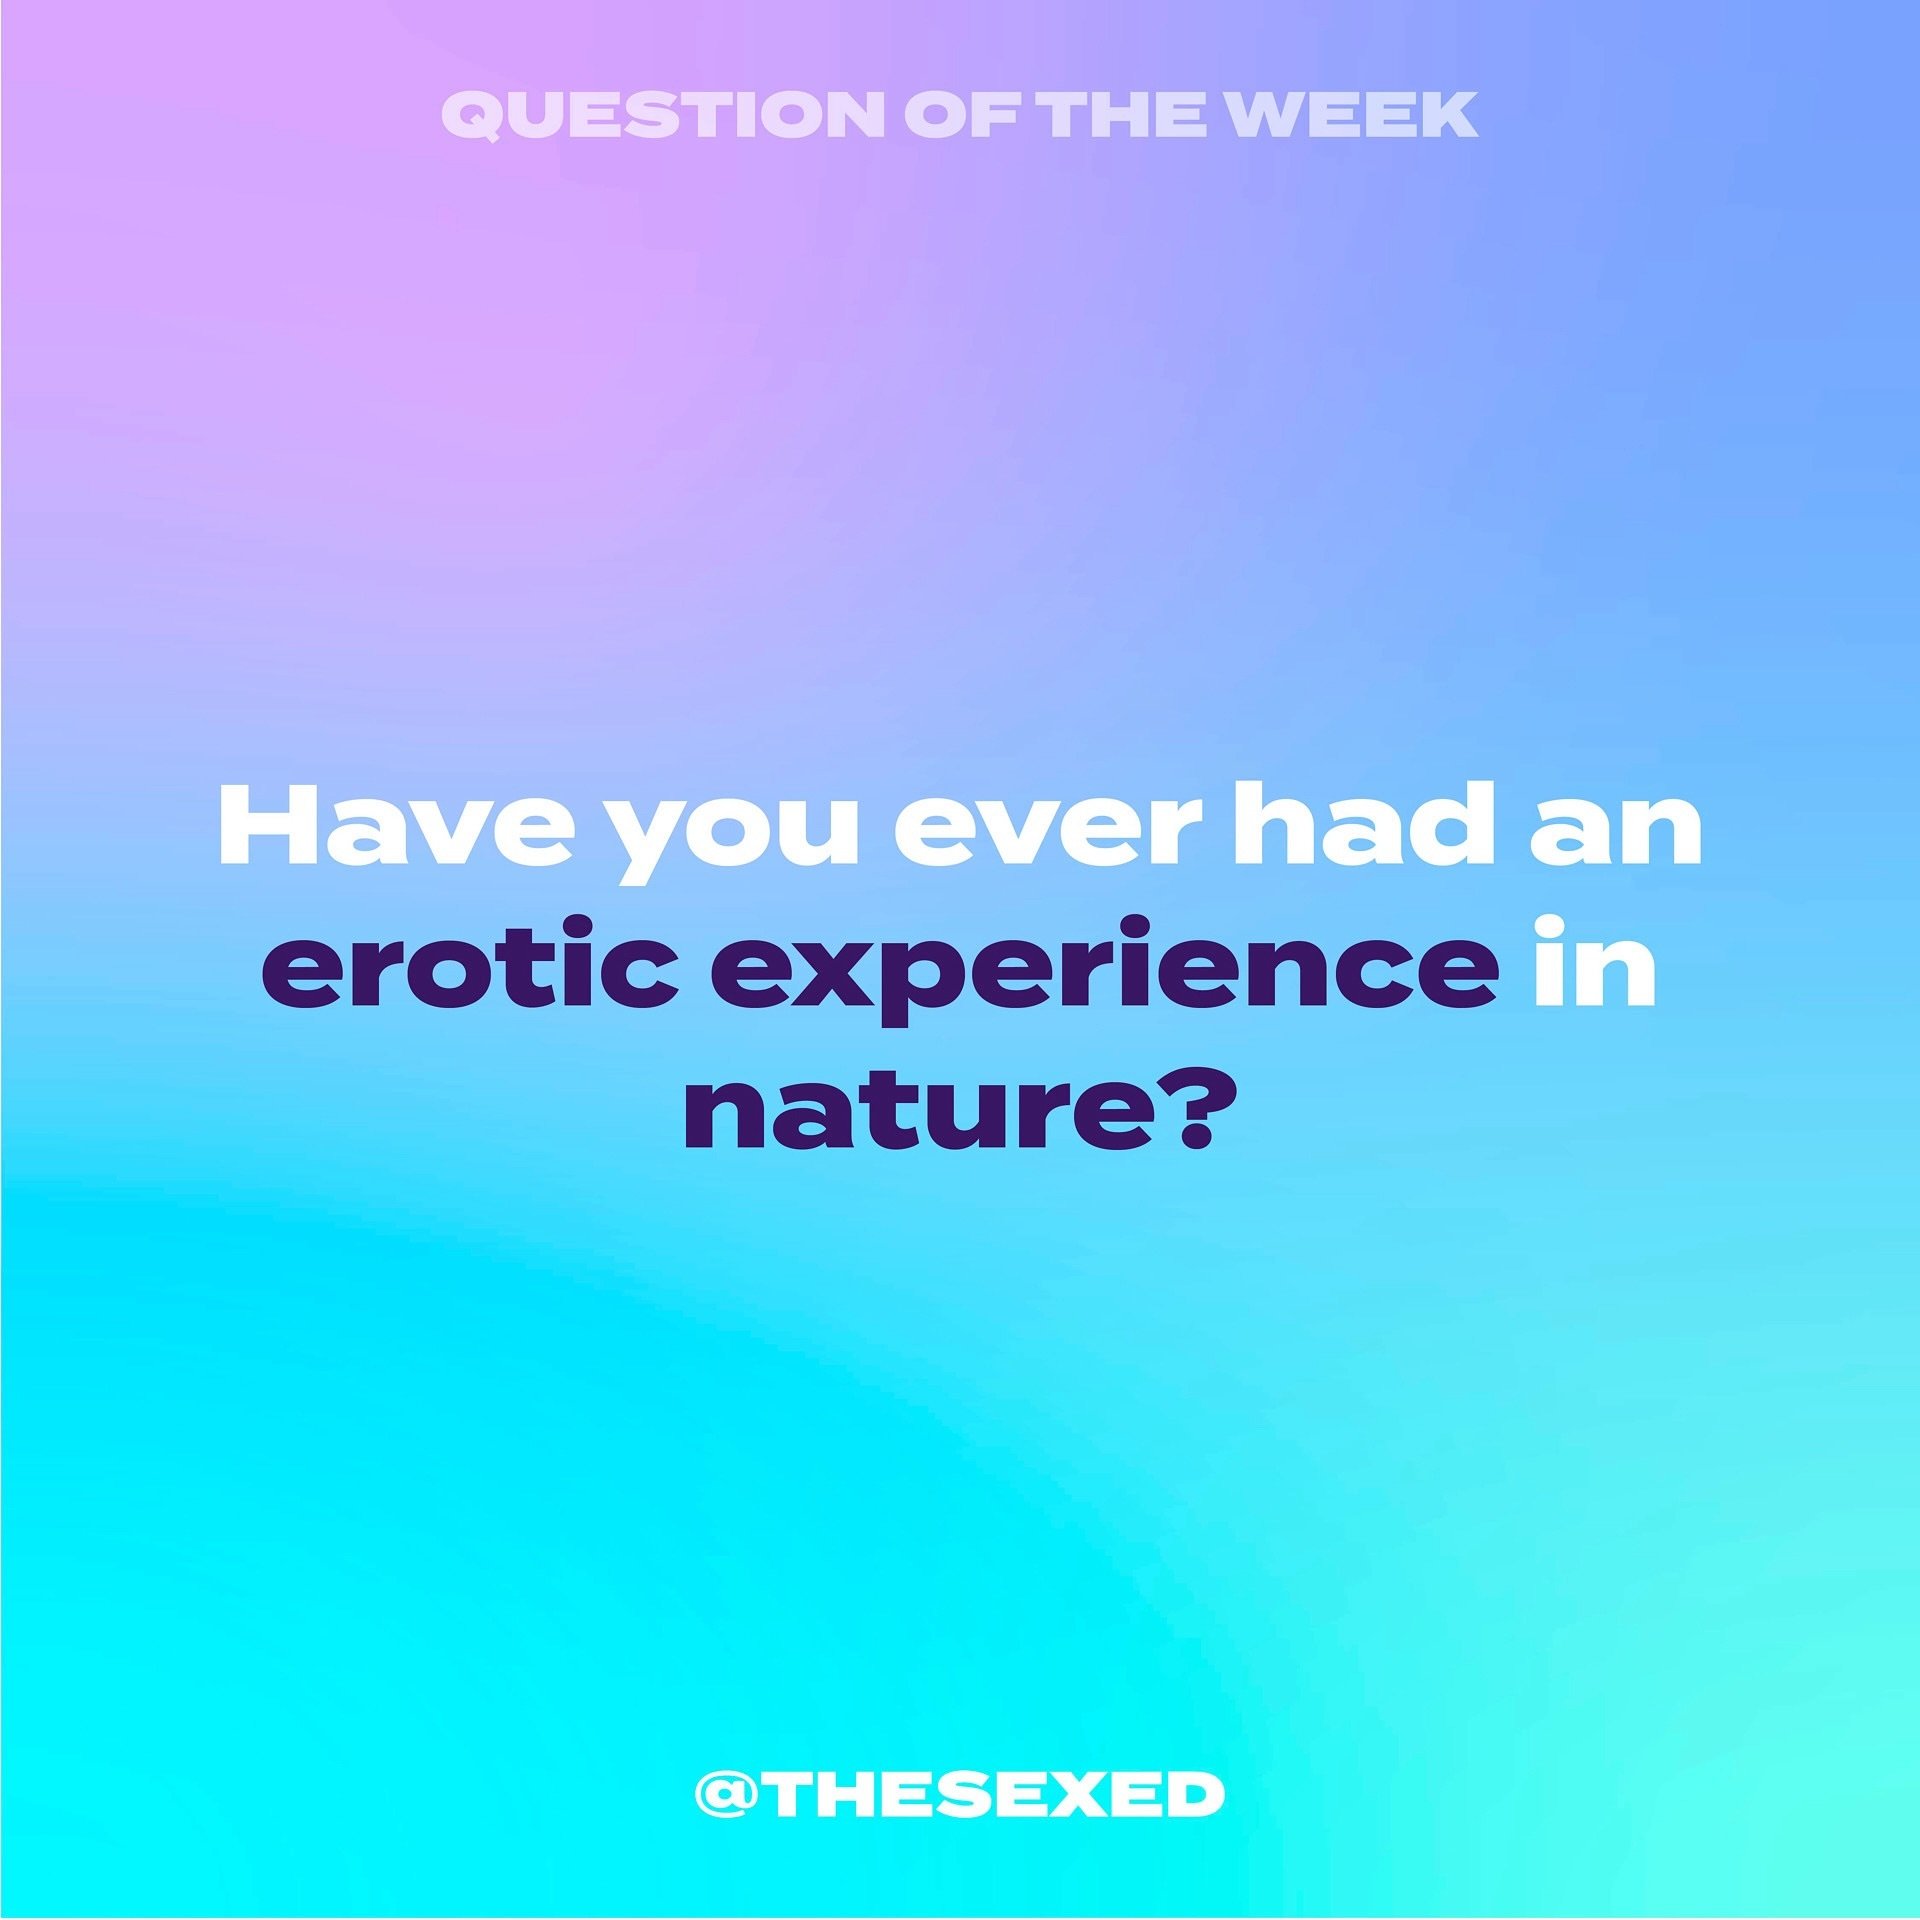 Comment below! 
⠀⠀⠀⠀⠀⠀⠀⠀⠀
⠀⠀⠀⠀⠀⠀⠀⠀⠀
PSA: At The Sex Ed, we intend to create a safe environment for our community to feel heard, use their voices, and share experiences. We do not condone sending illicit images and/or harassment of any form to any of 